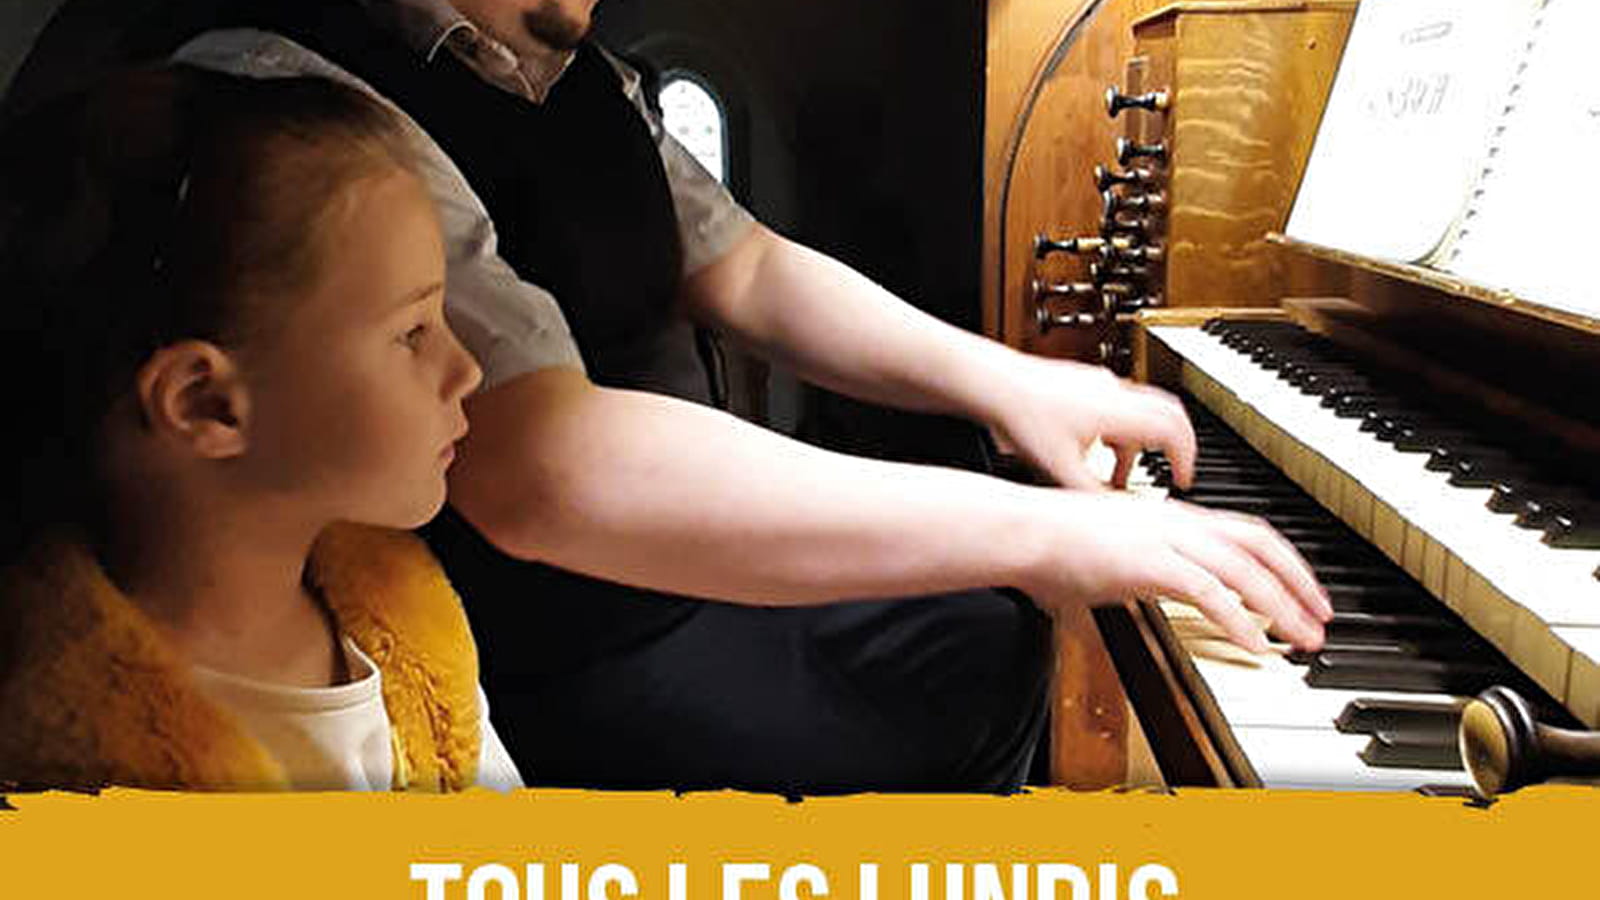 Guided tour: the organ in the church at Is-sur-Tille